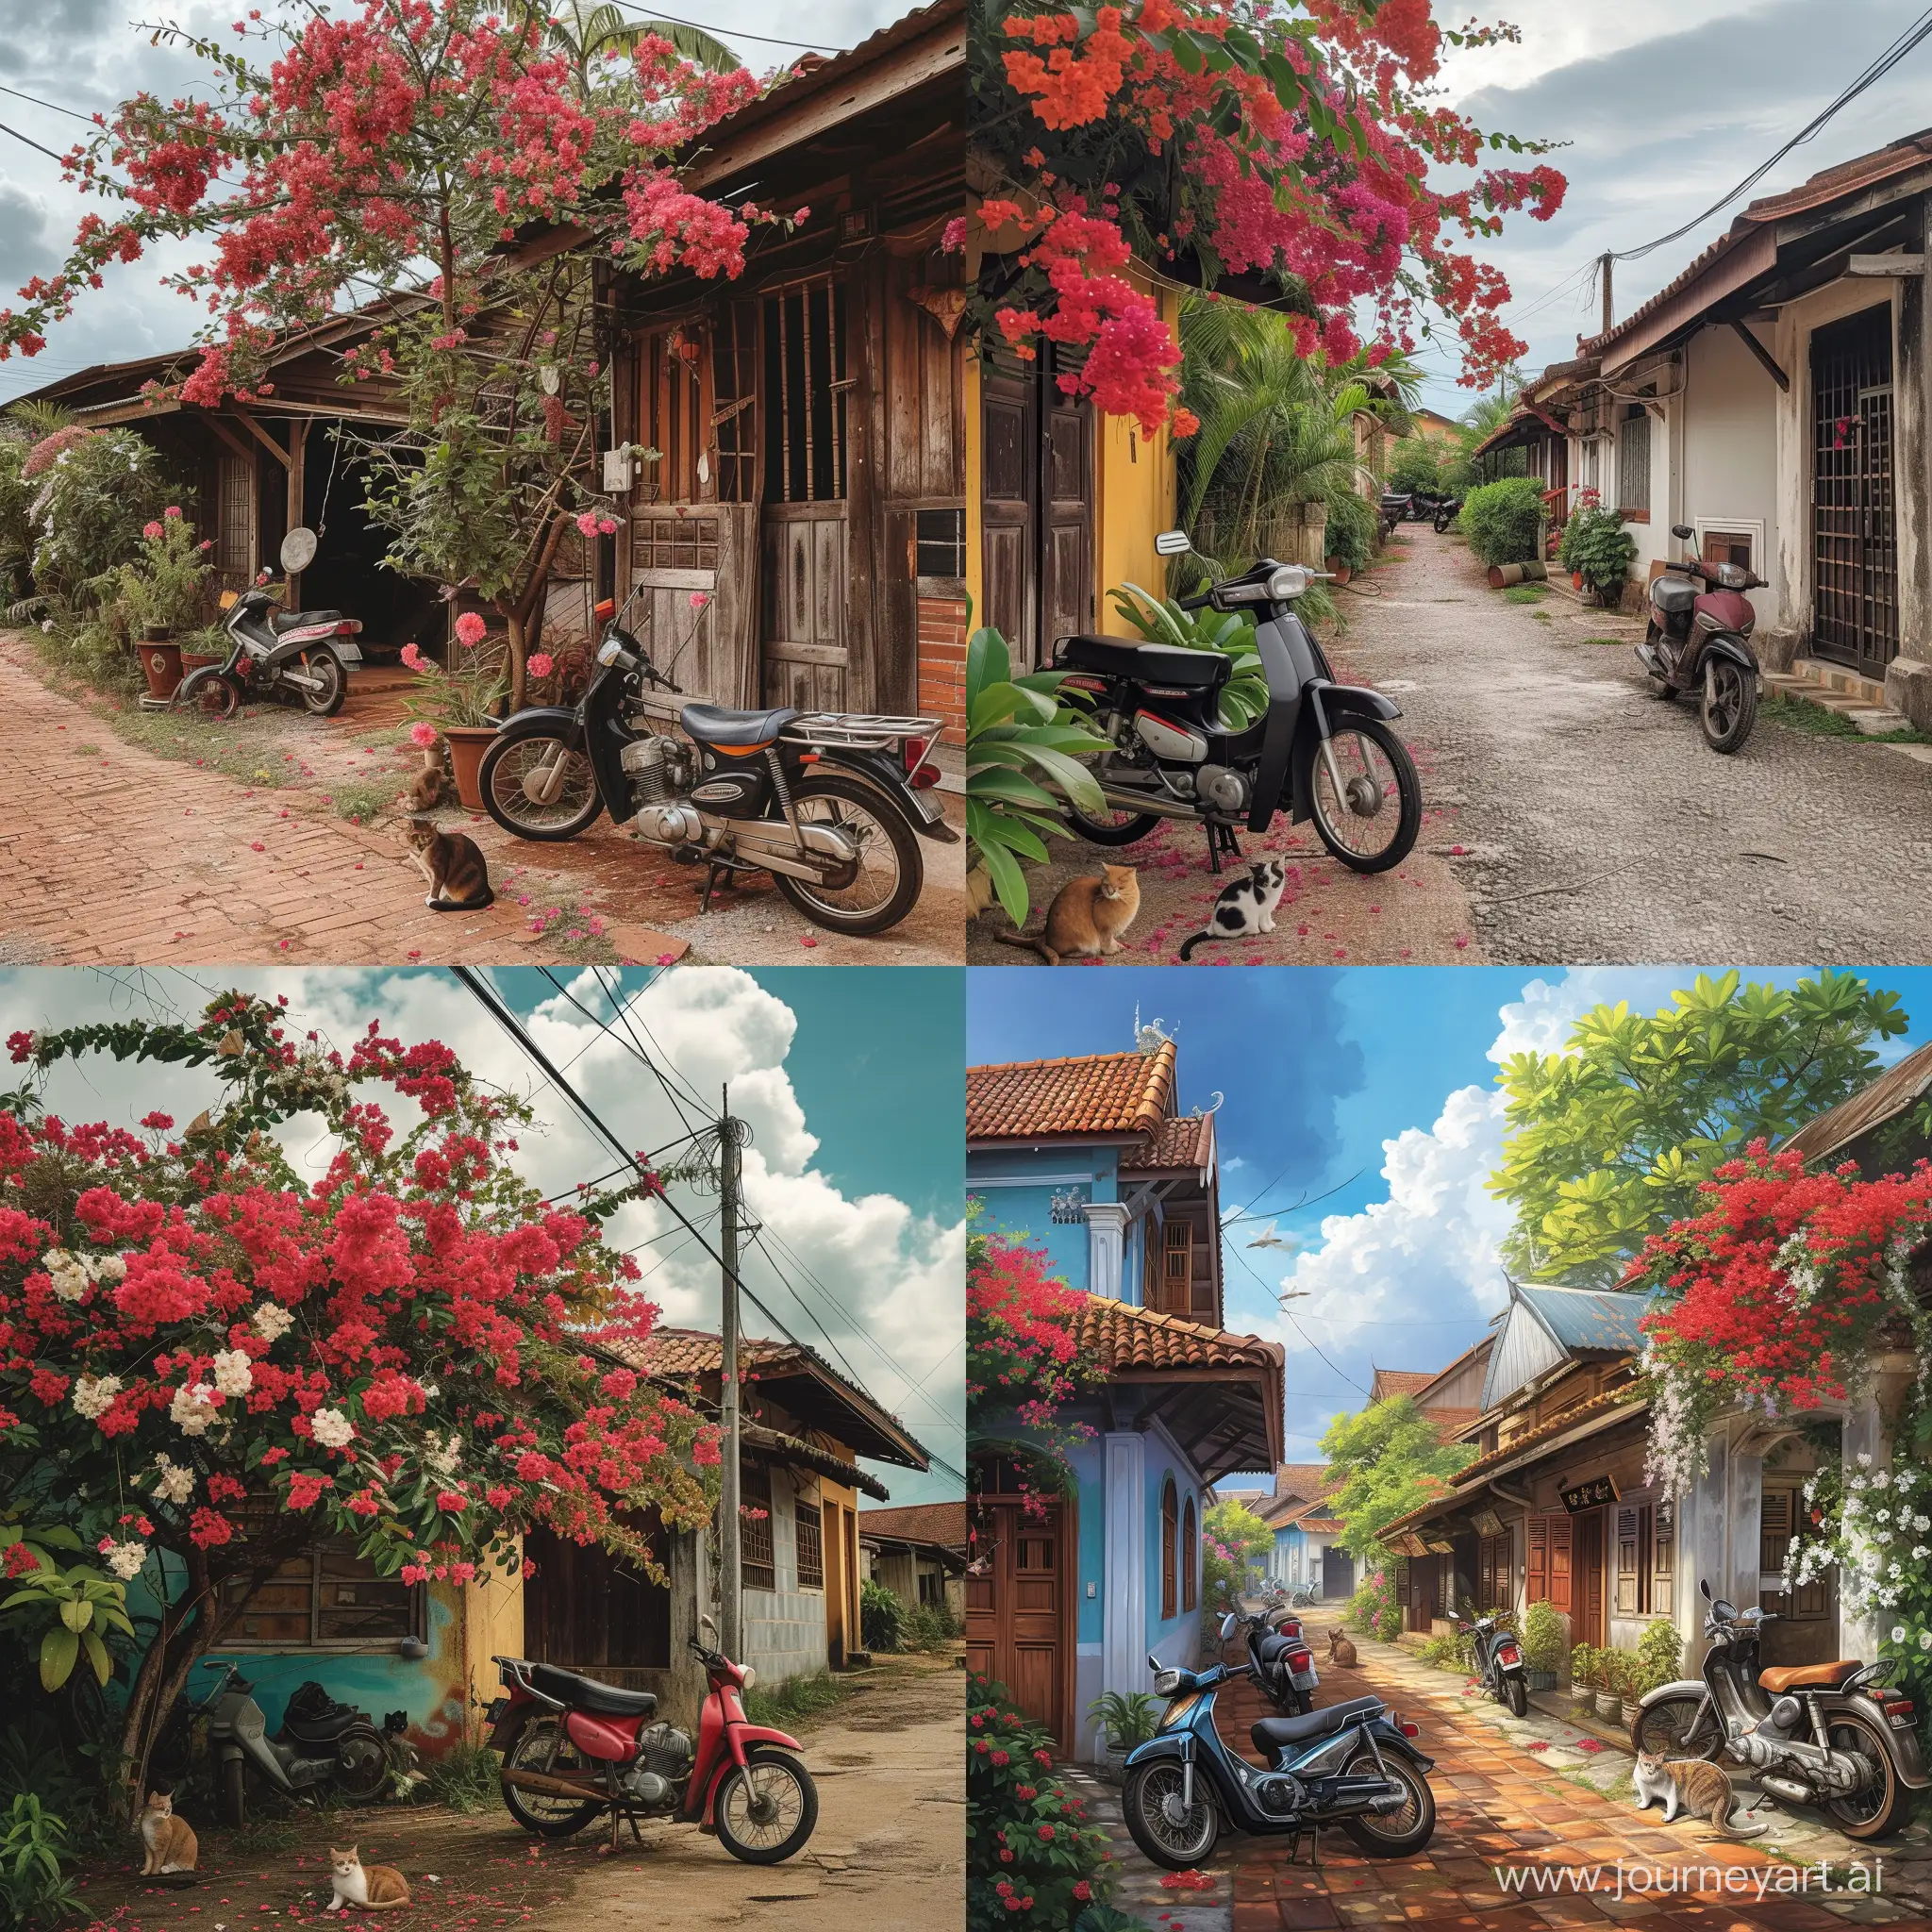 Scenic-Malay-Village-Traditional-Houses-Flower-Trees-Cats-and-Vintage-Motorcycles